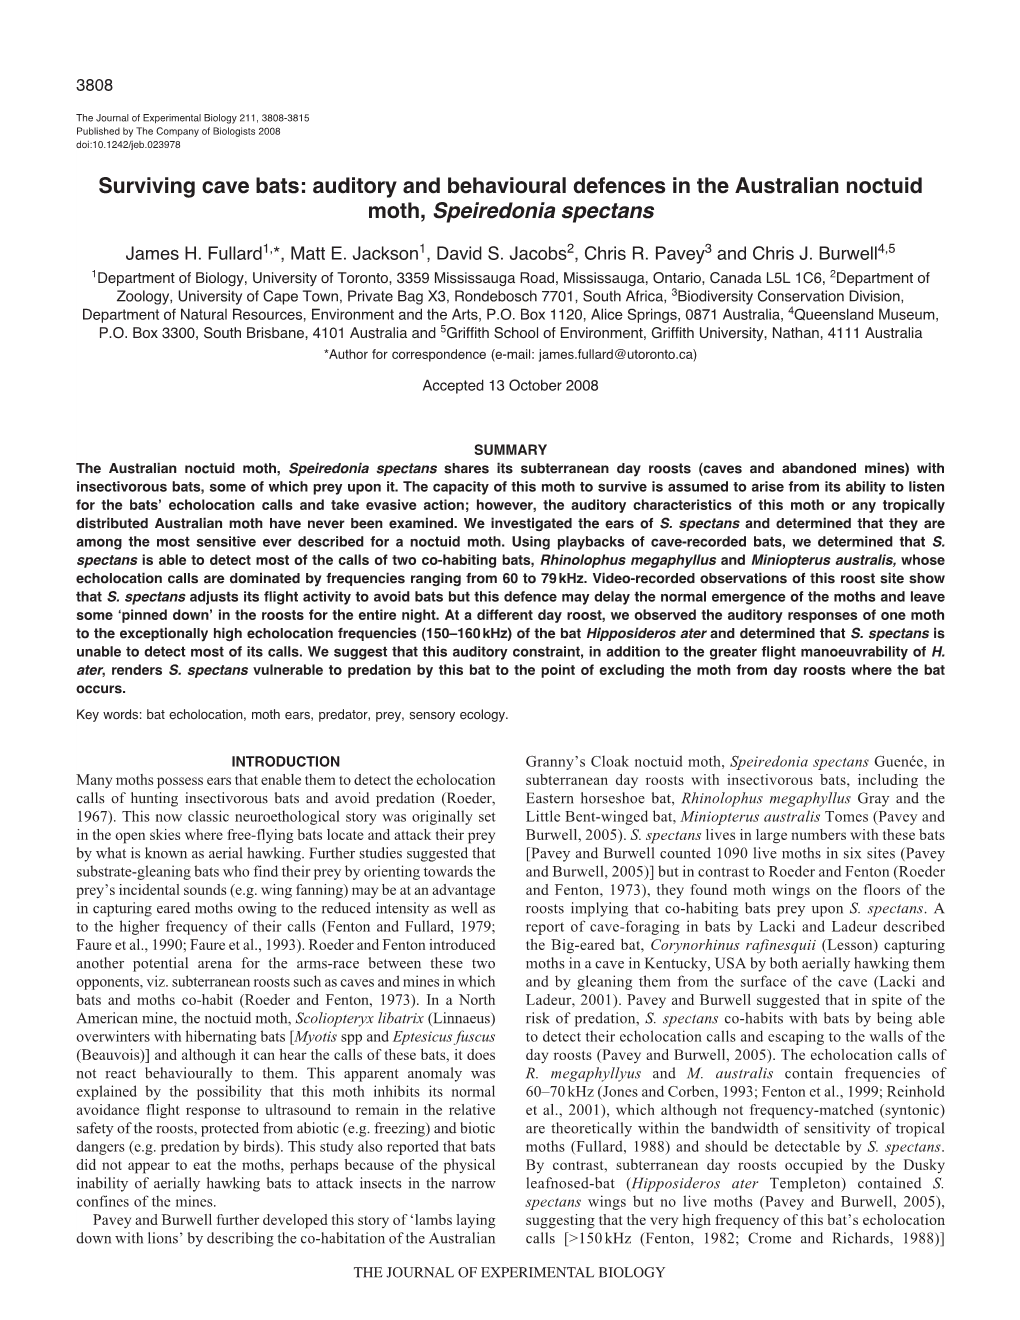 Surviving Cave Bats: Auditory and Behavioural Defences in the Australian Noctuid Moth, Speiredonia Spectans